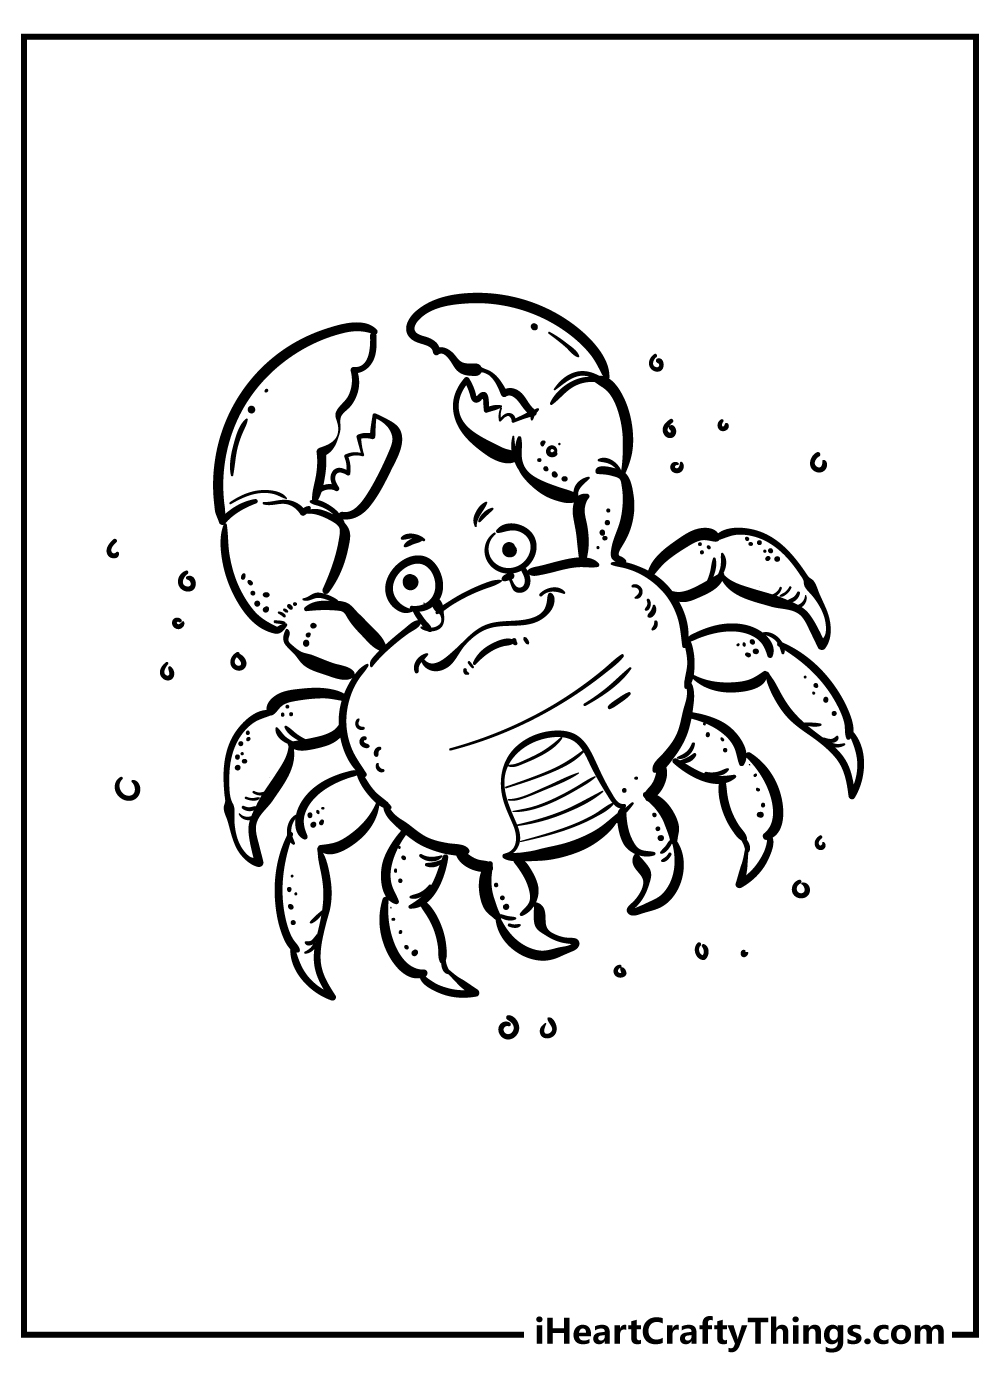 Crab Coloring Pages for preschoolers free printable